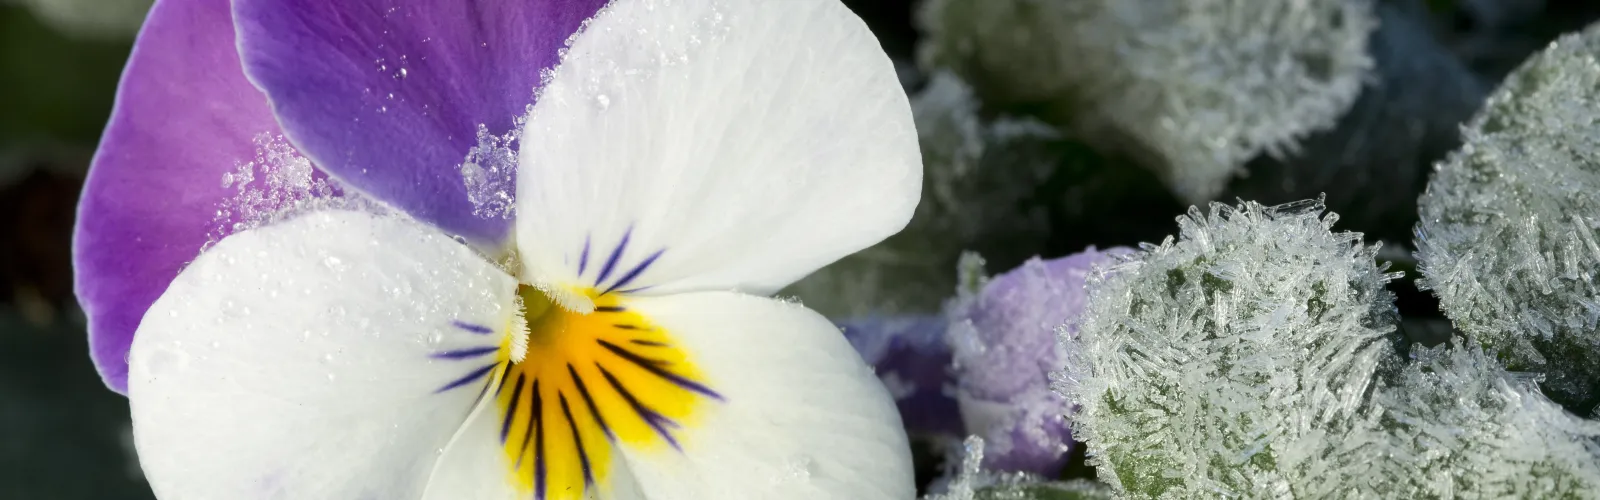 frost on a purple and white pansy flower